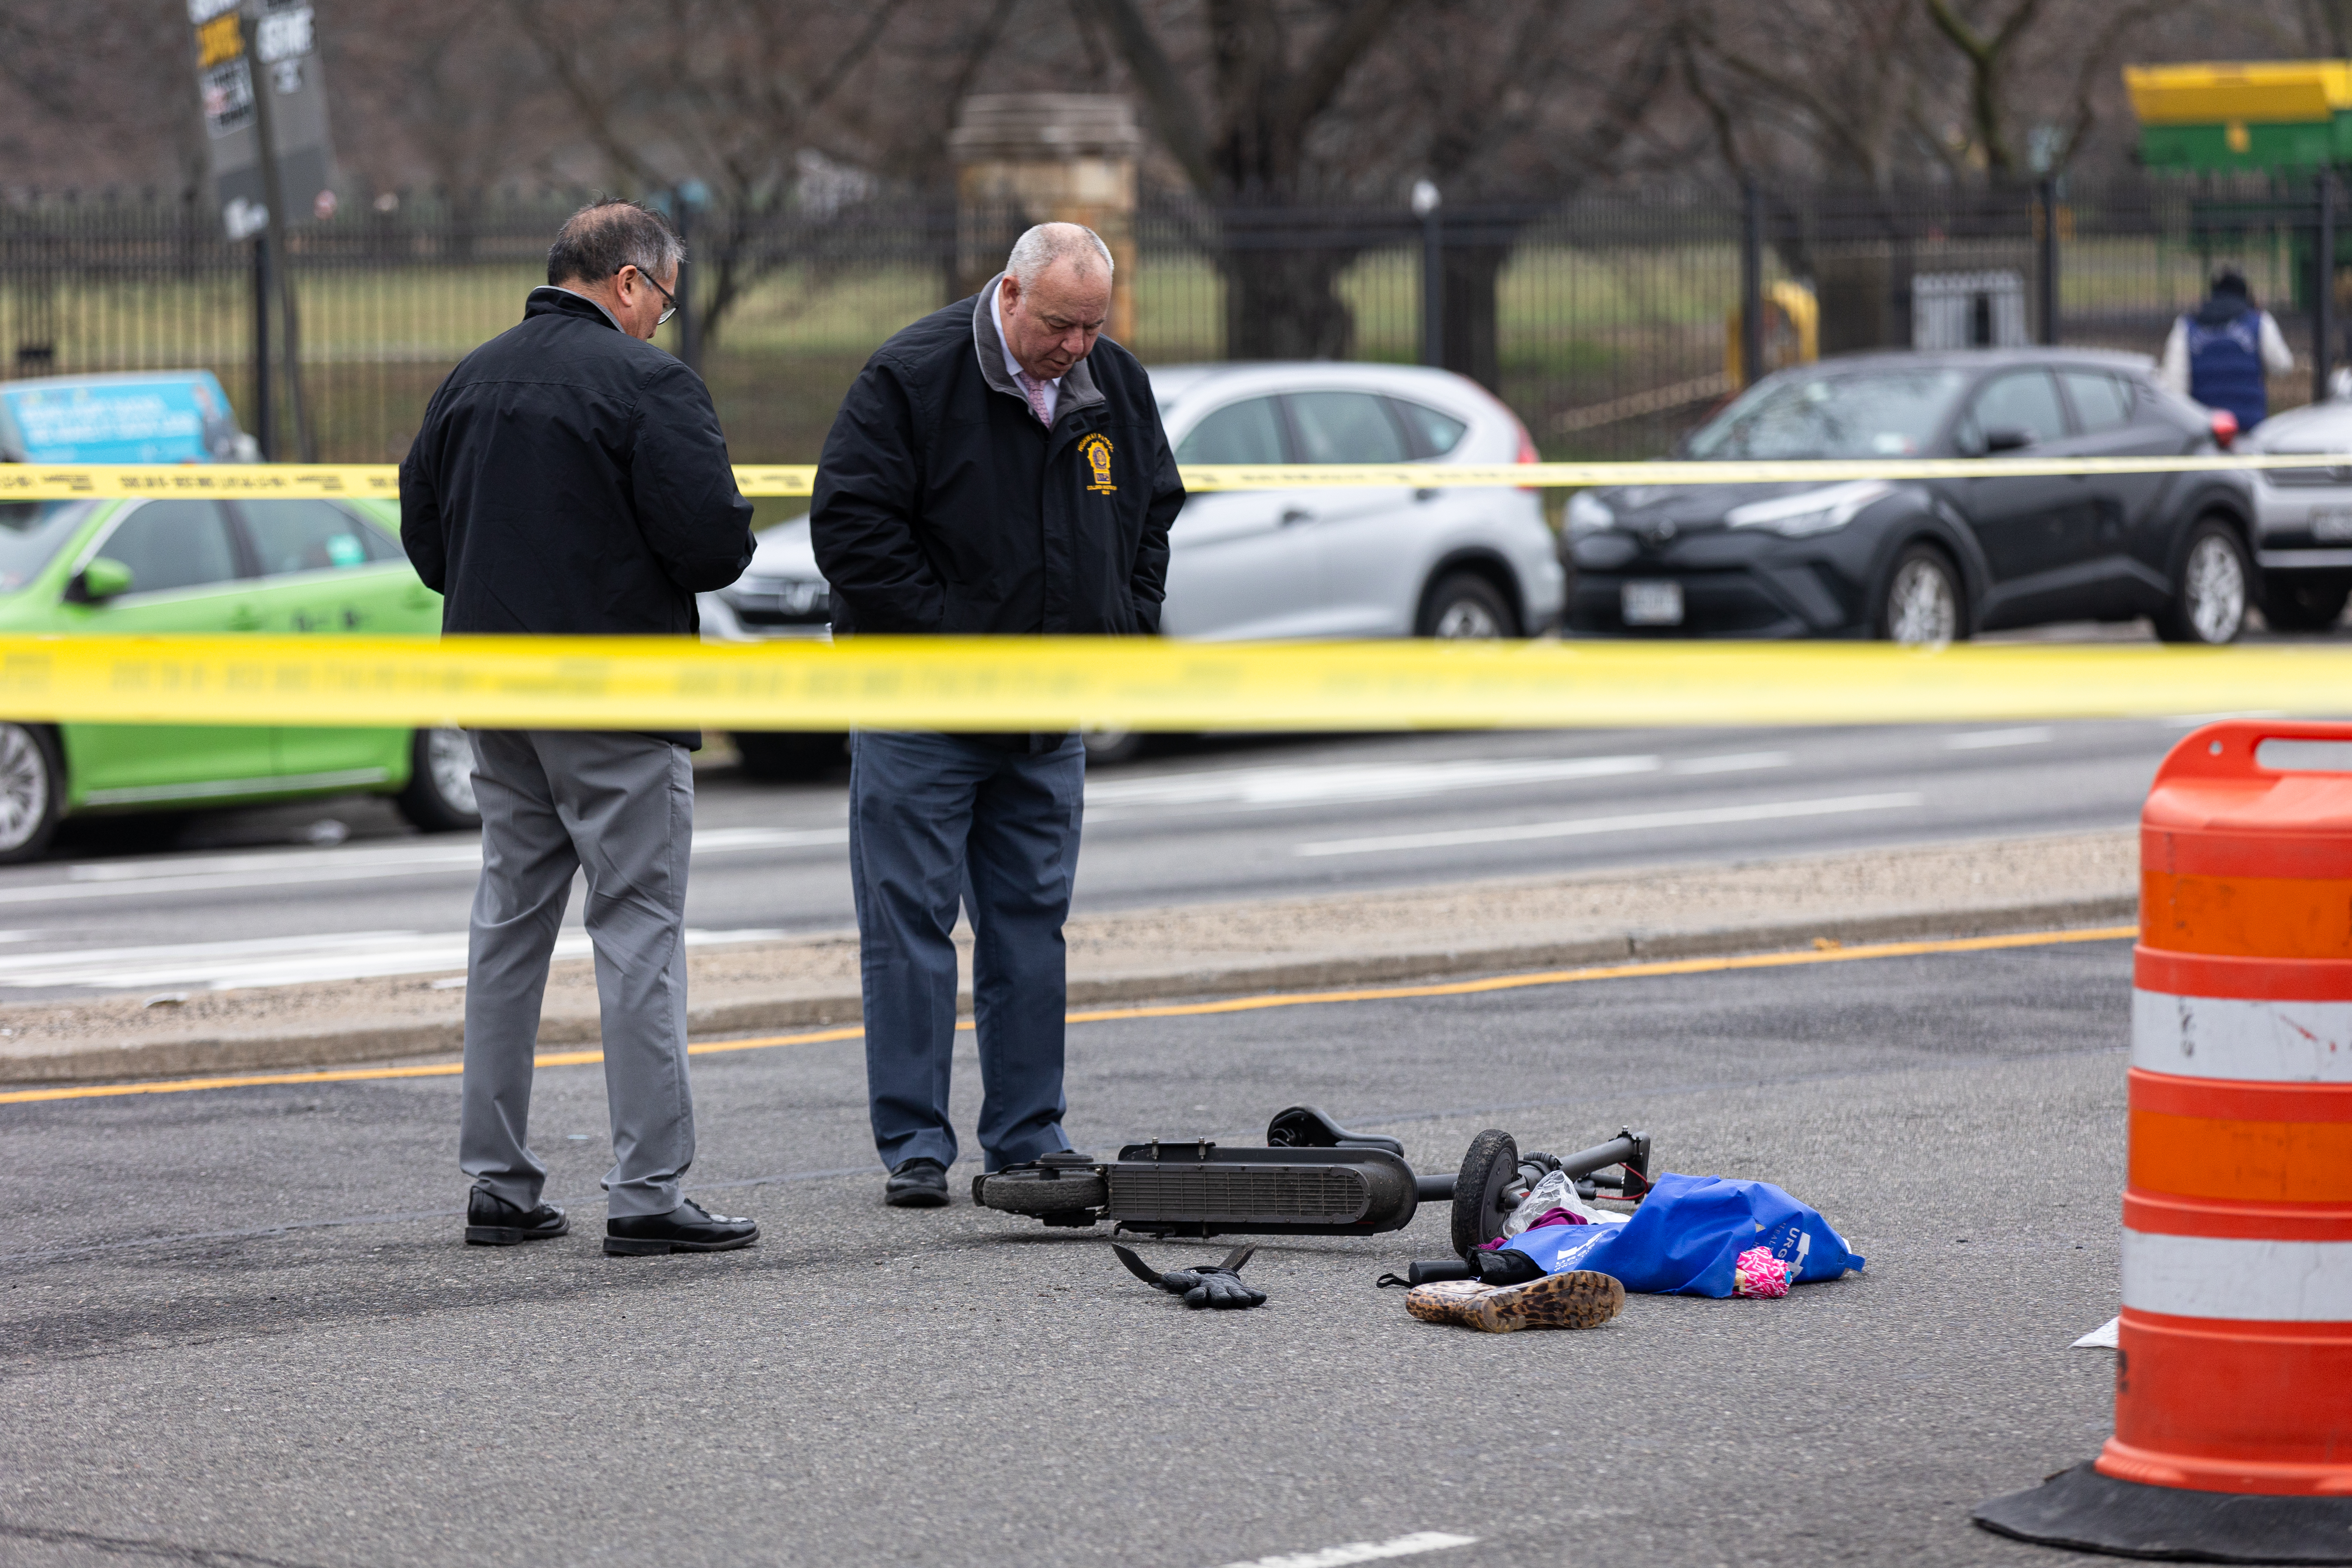 Officers, behind police tape, look at a scooter lying on the road.